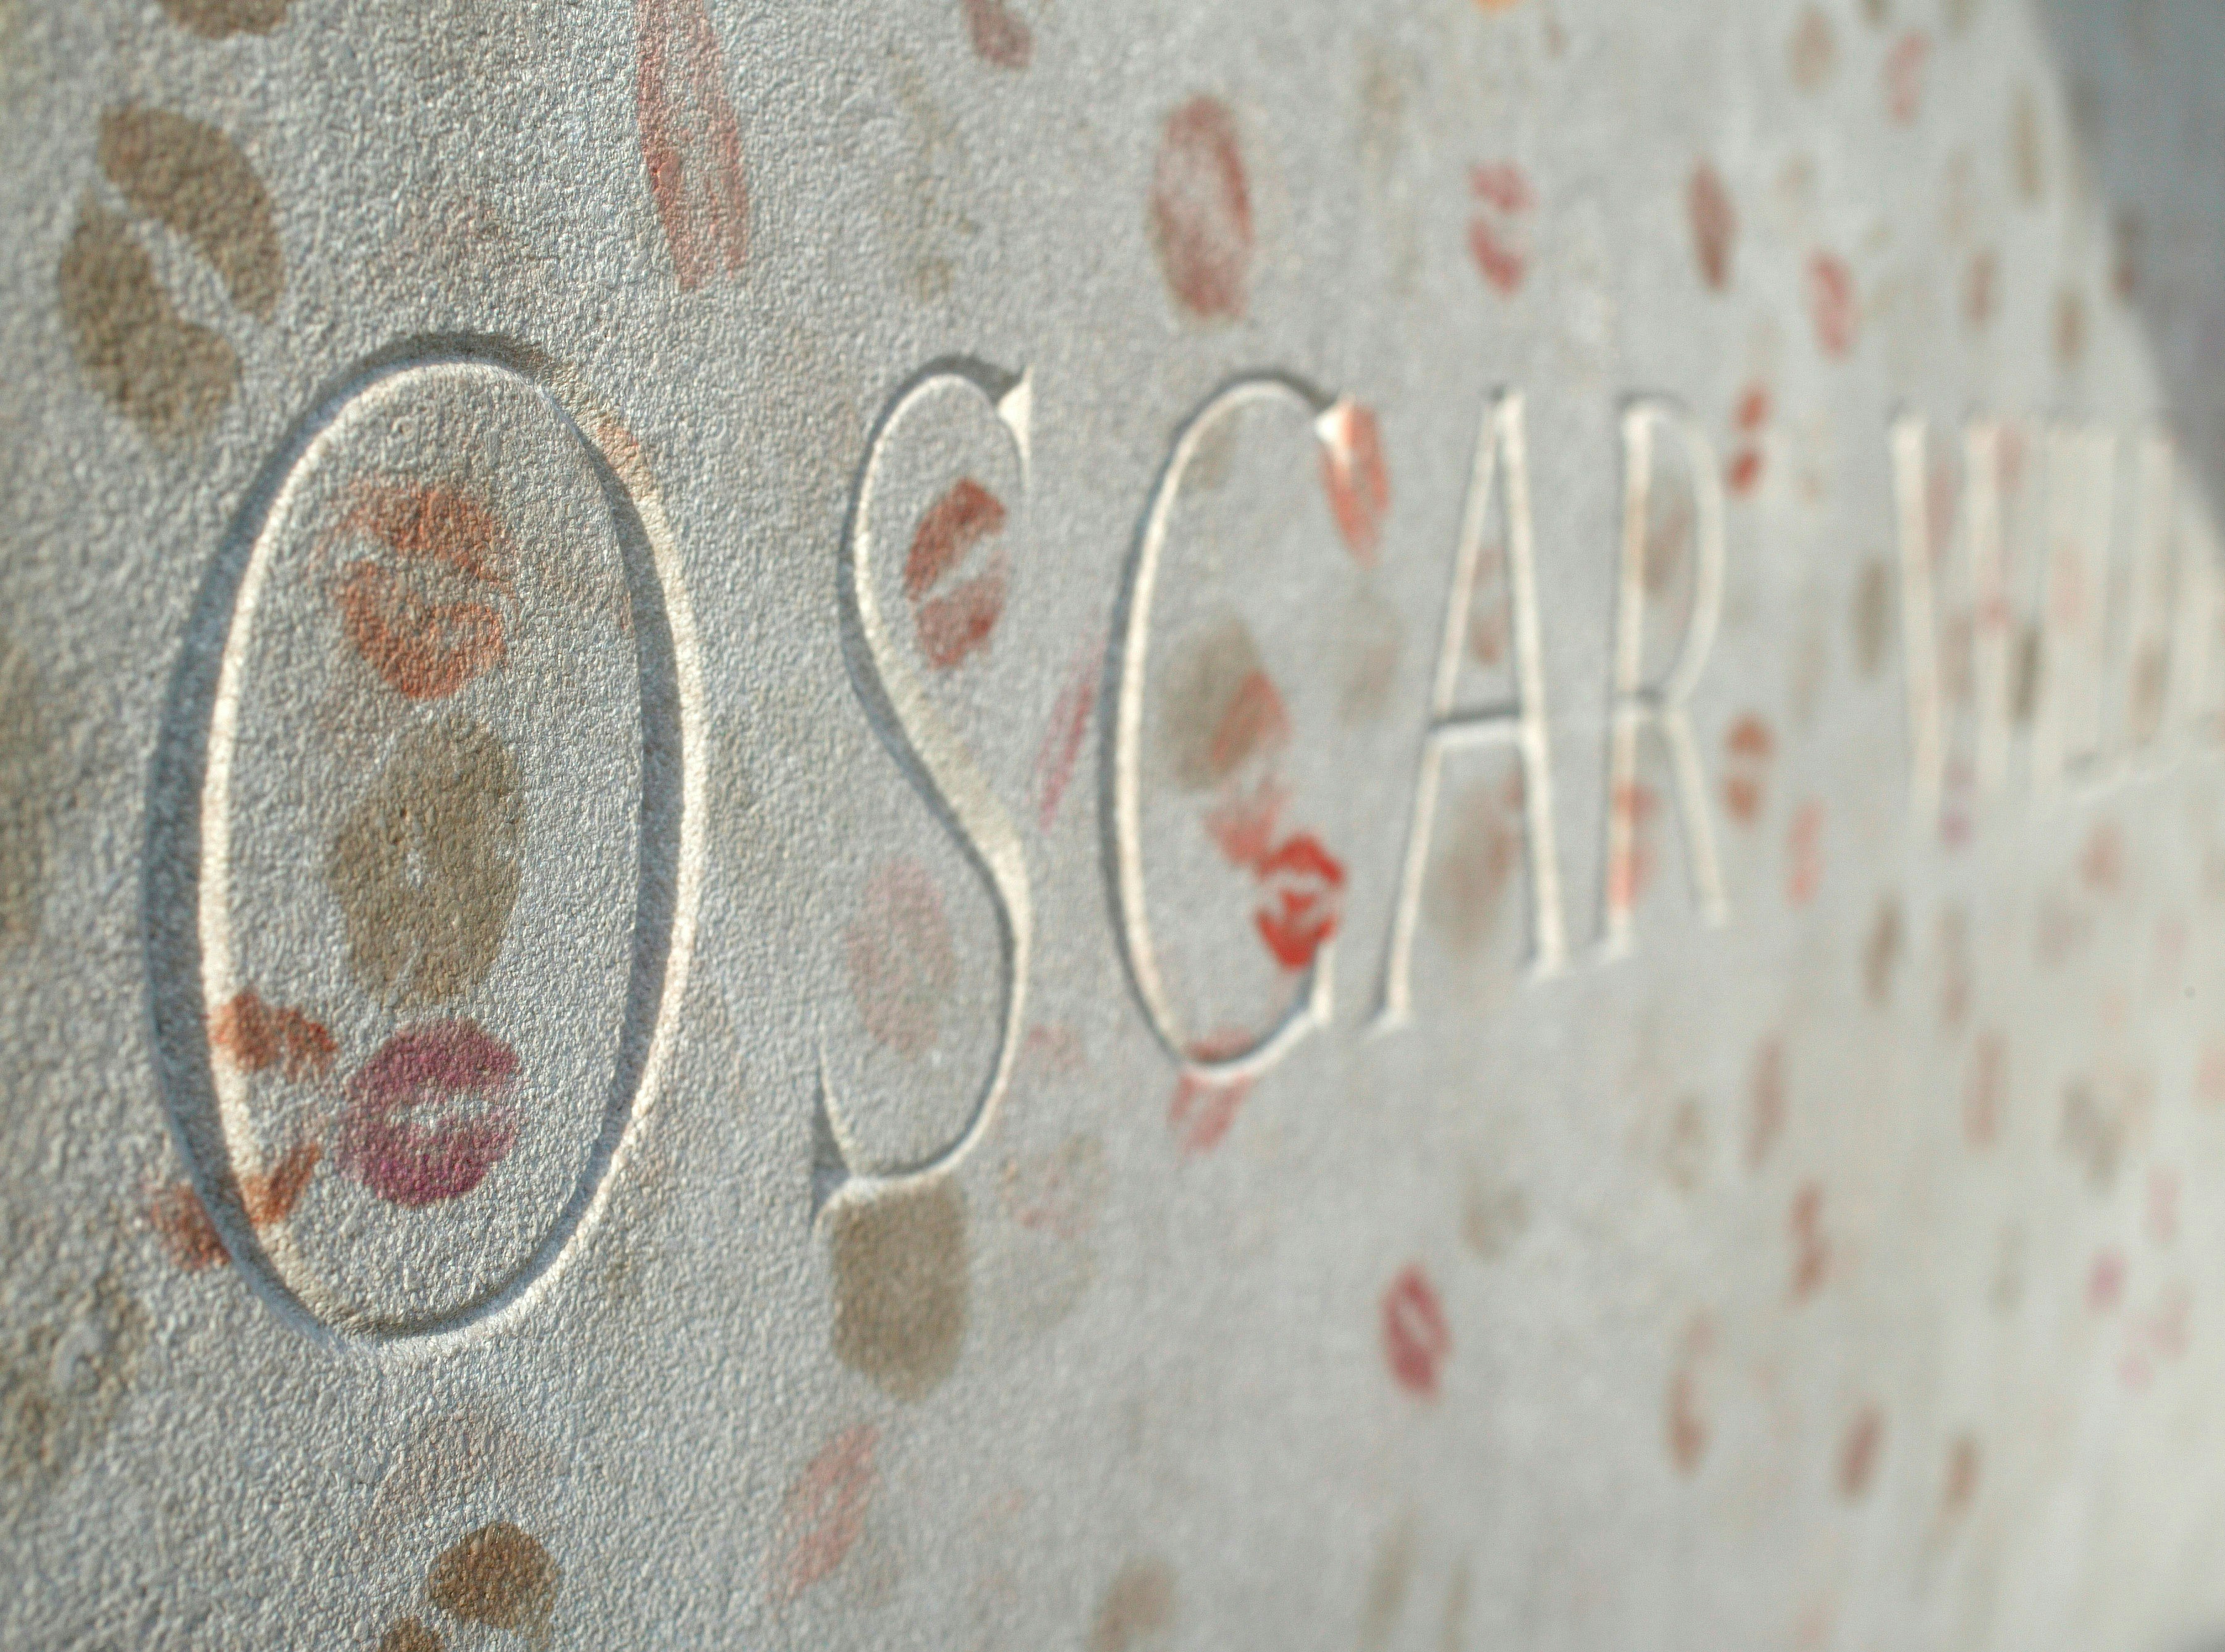 A close-up of the words 'Oscar Wilde' taken from the poet's tomb in Paris. The tomb is covered in lipstick kiss marks from visitors.